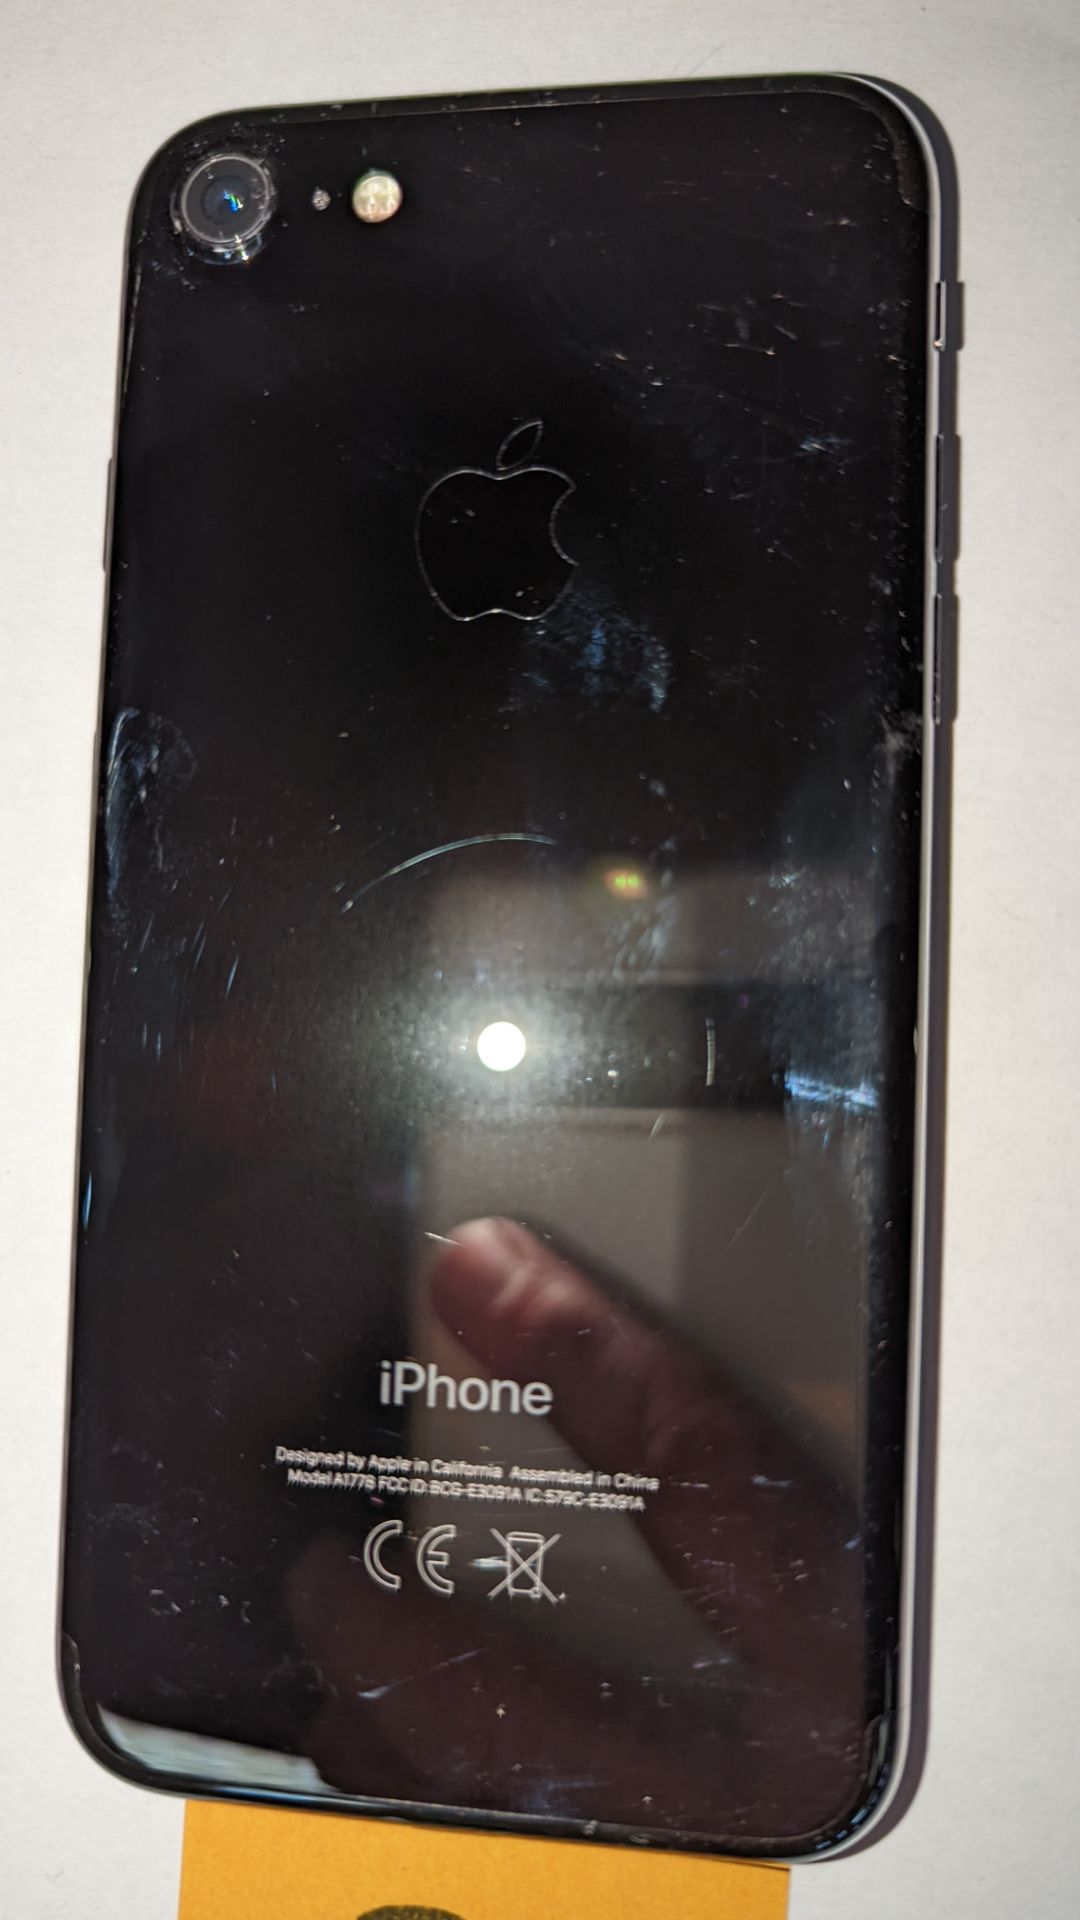 Apple iPhone 7, 32GB capacity, model A1778. No ancillaries or accessories - Image 9 of 12